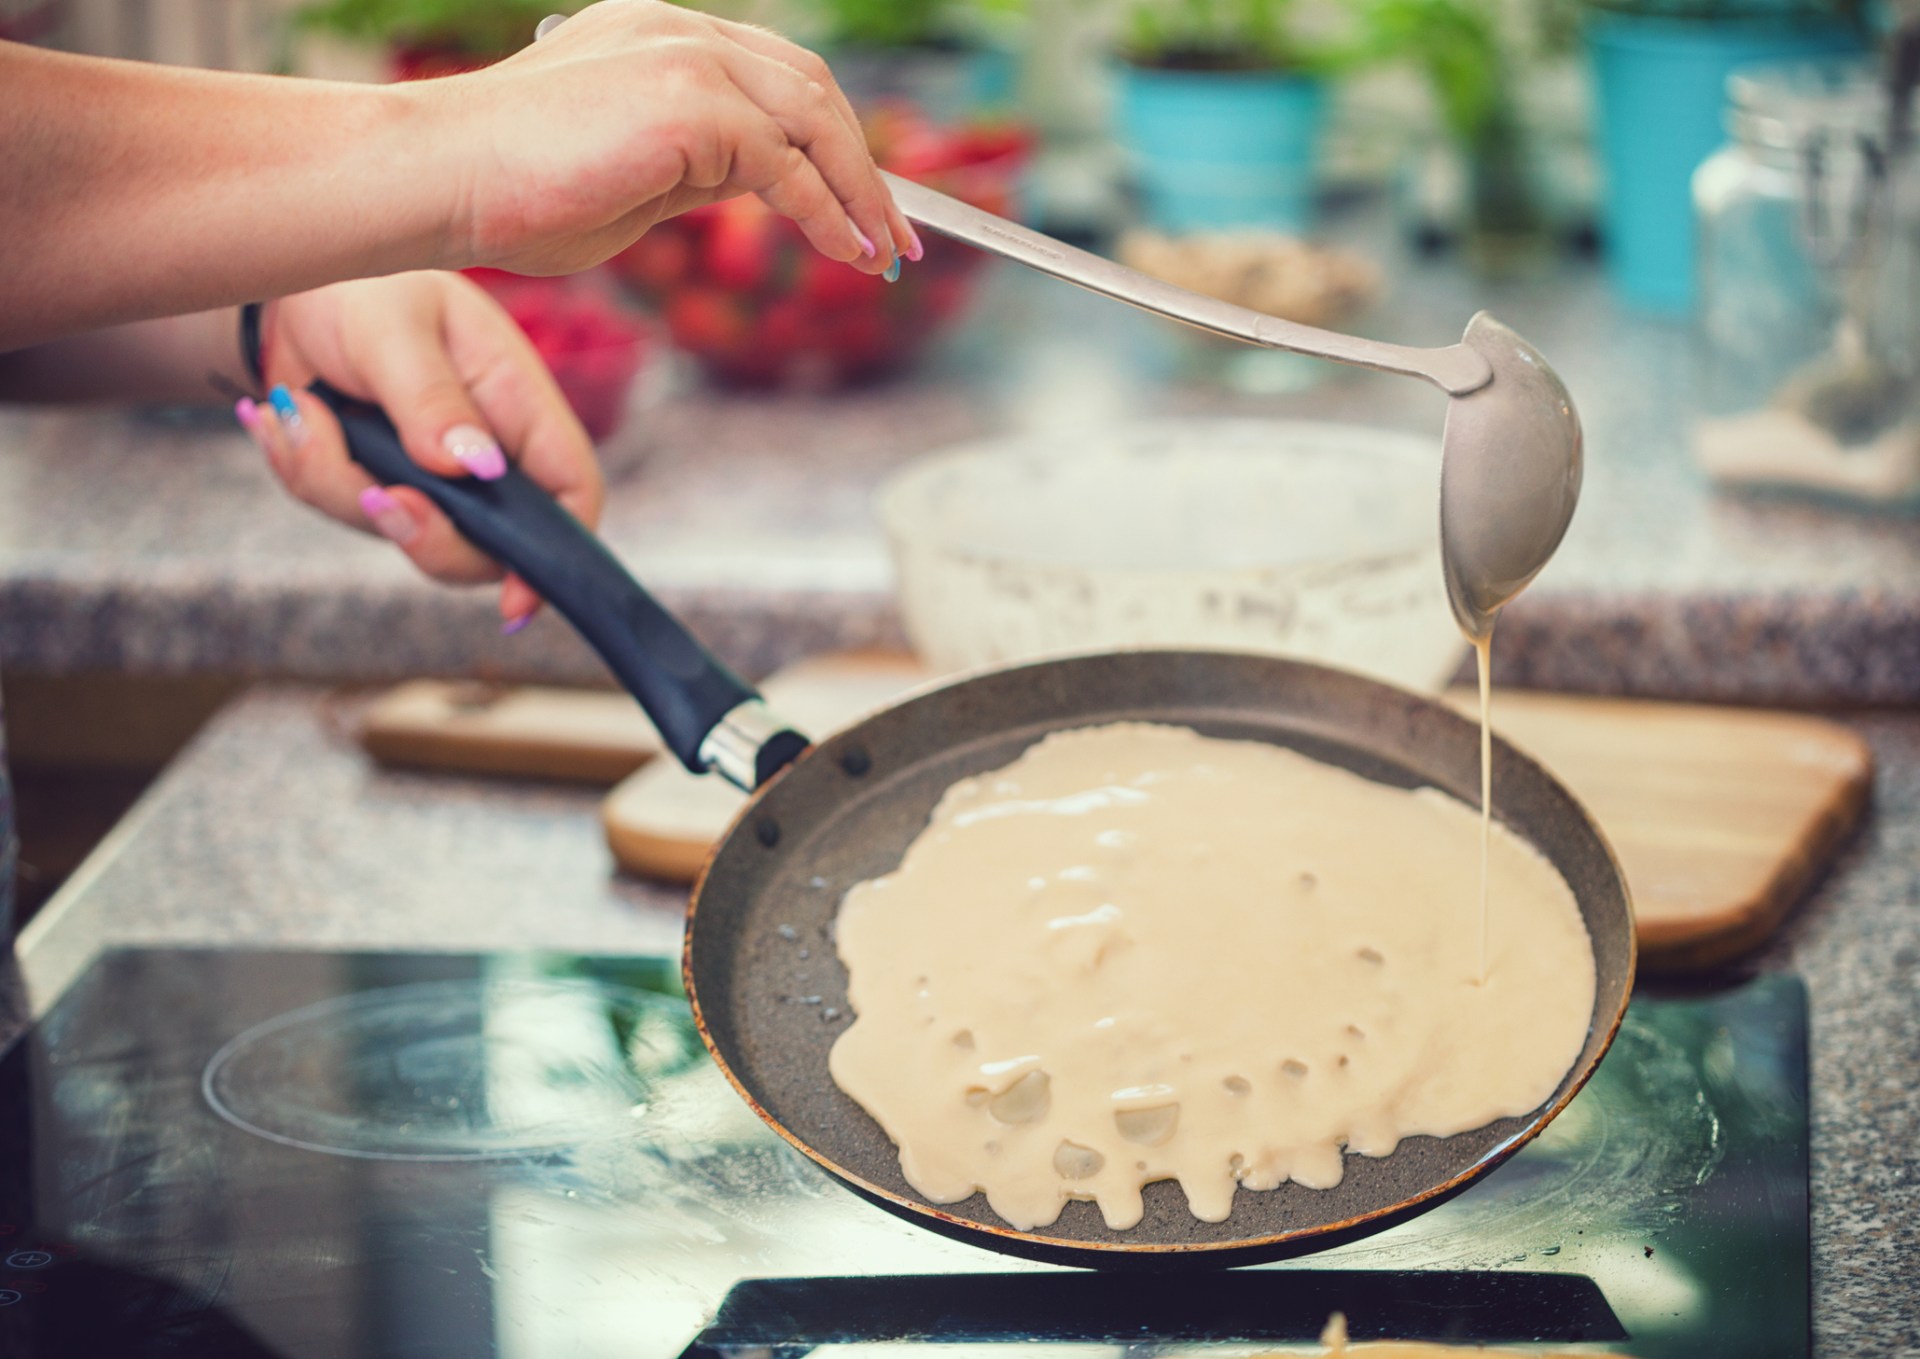 how to, how to make the perfect pancake, according to science